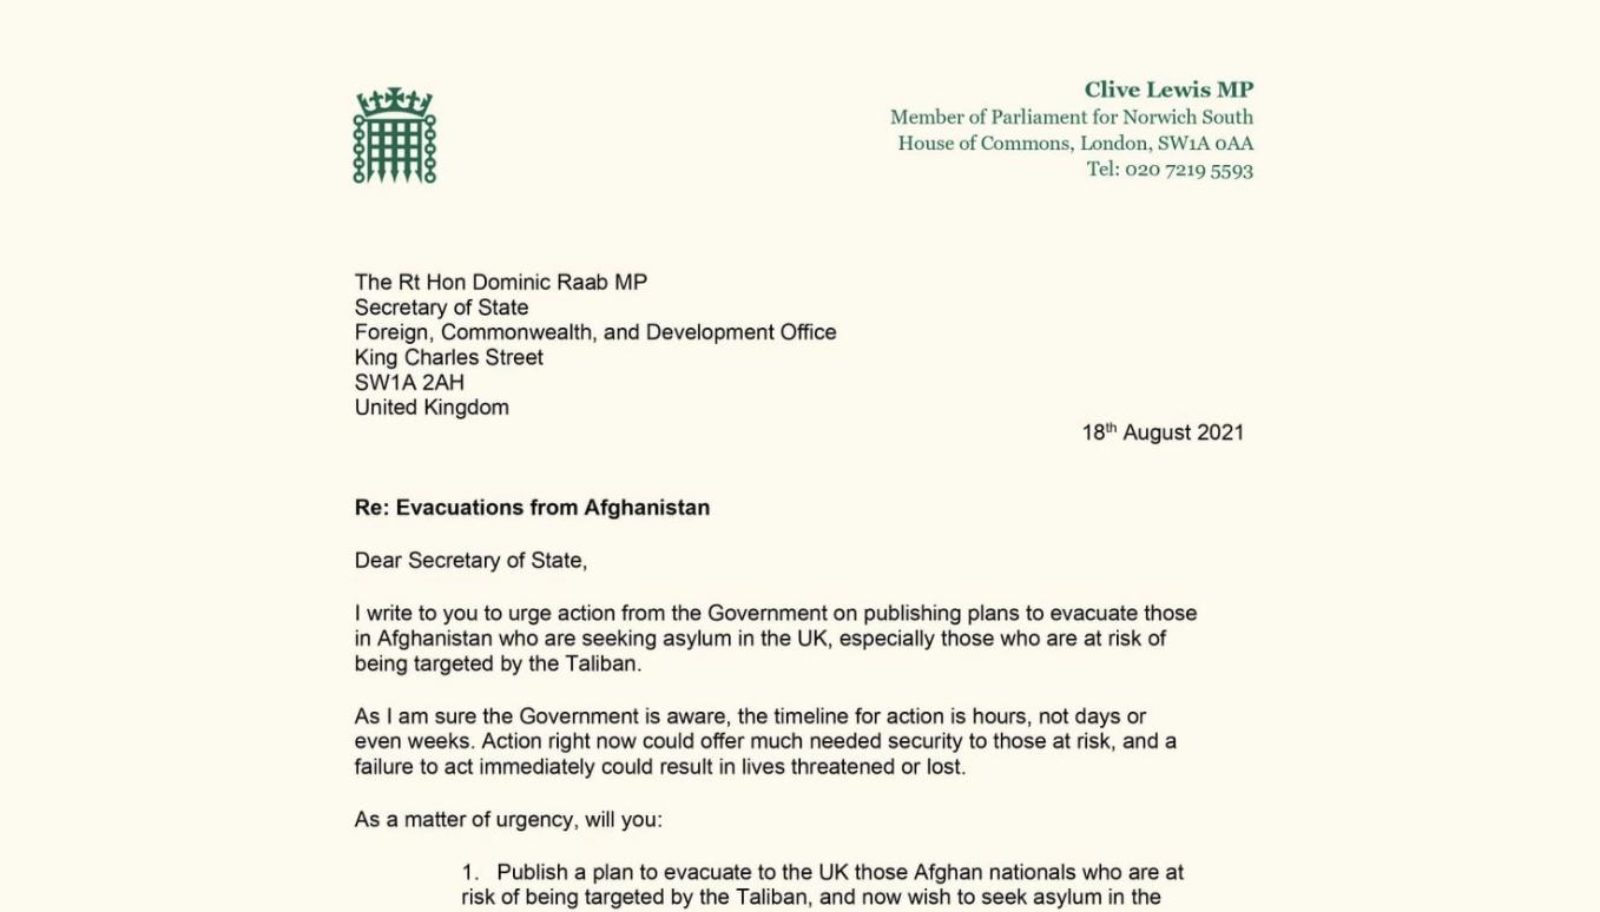 Image of a letter to the Secretary of State for Foreign Affairs